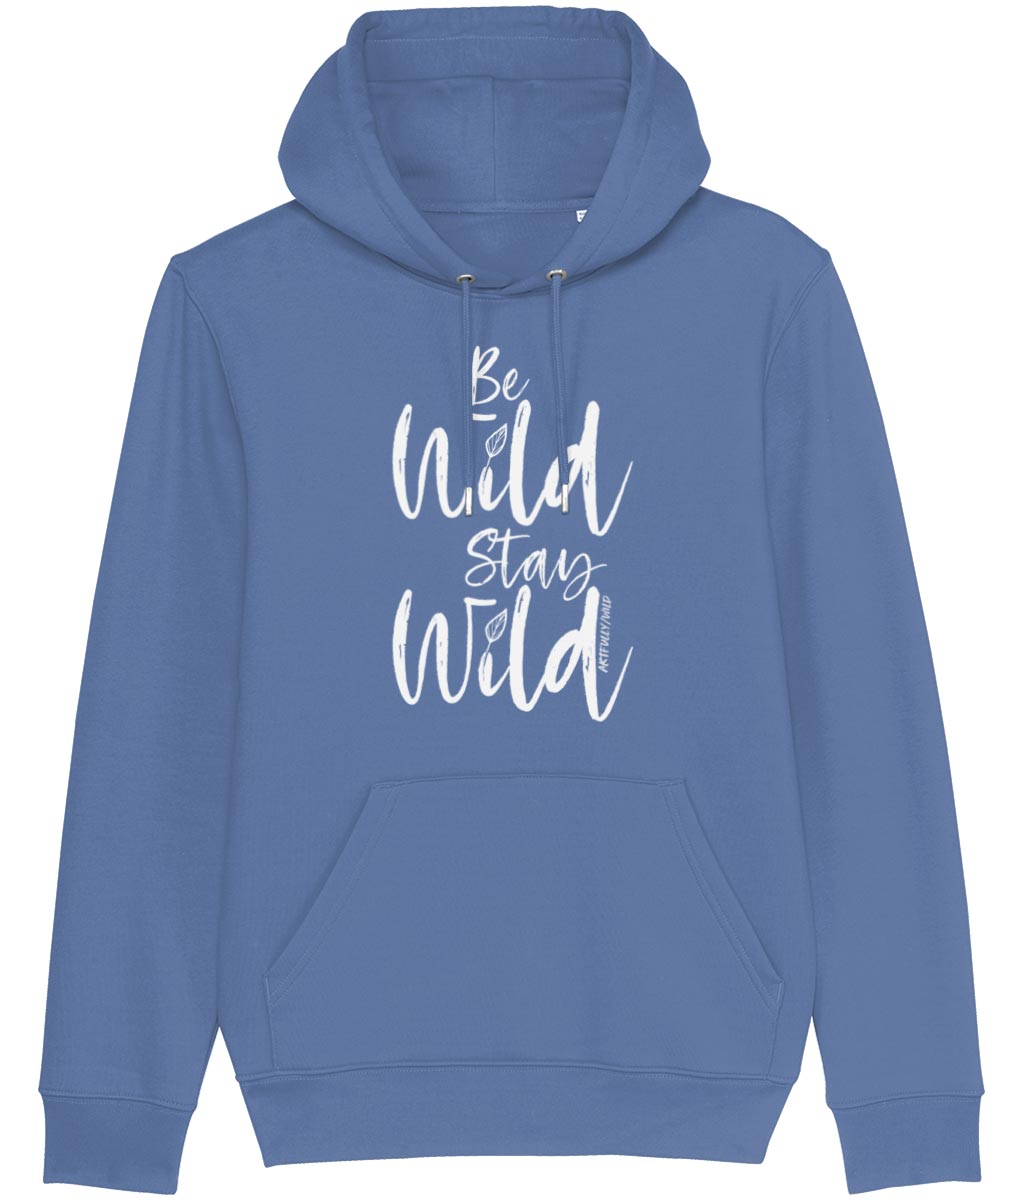 ‘BE WILD STAY WILD’ Classic Bright Blue Hoodie. Unisex/Men/Women. Made with Certified GOTS Organic Cotton. Printed in UK with water-based Inks. Sustainable Eco-friendly Clothing. Original Illustration by Artfully/Wild.